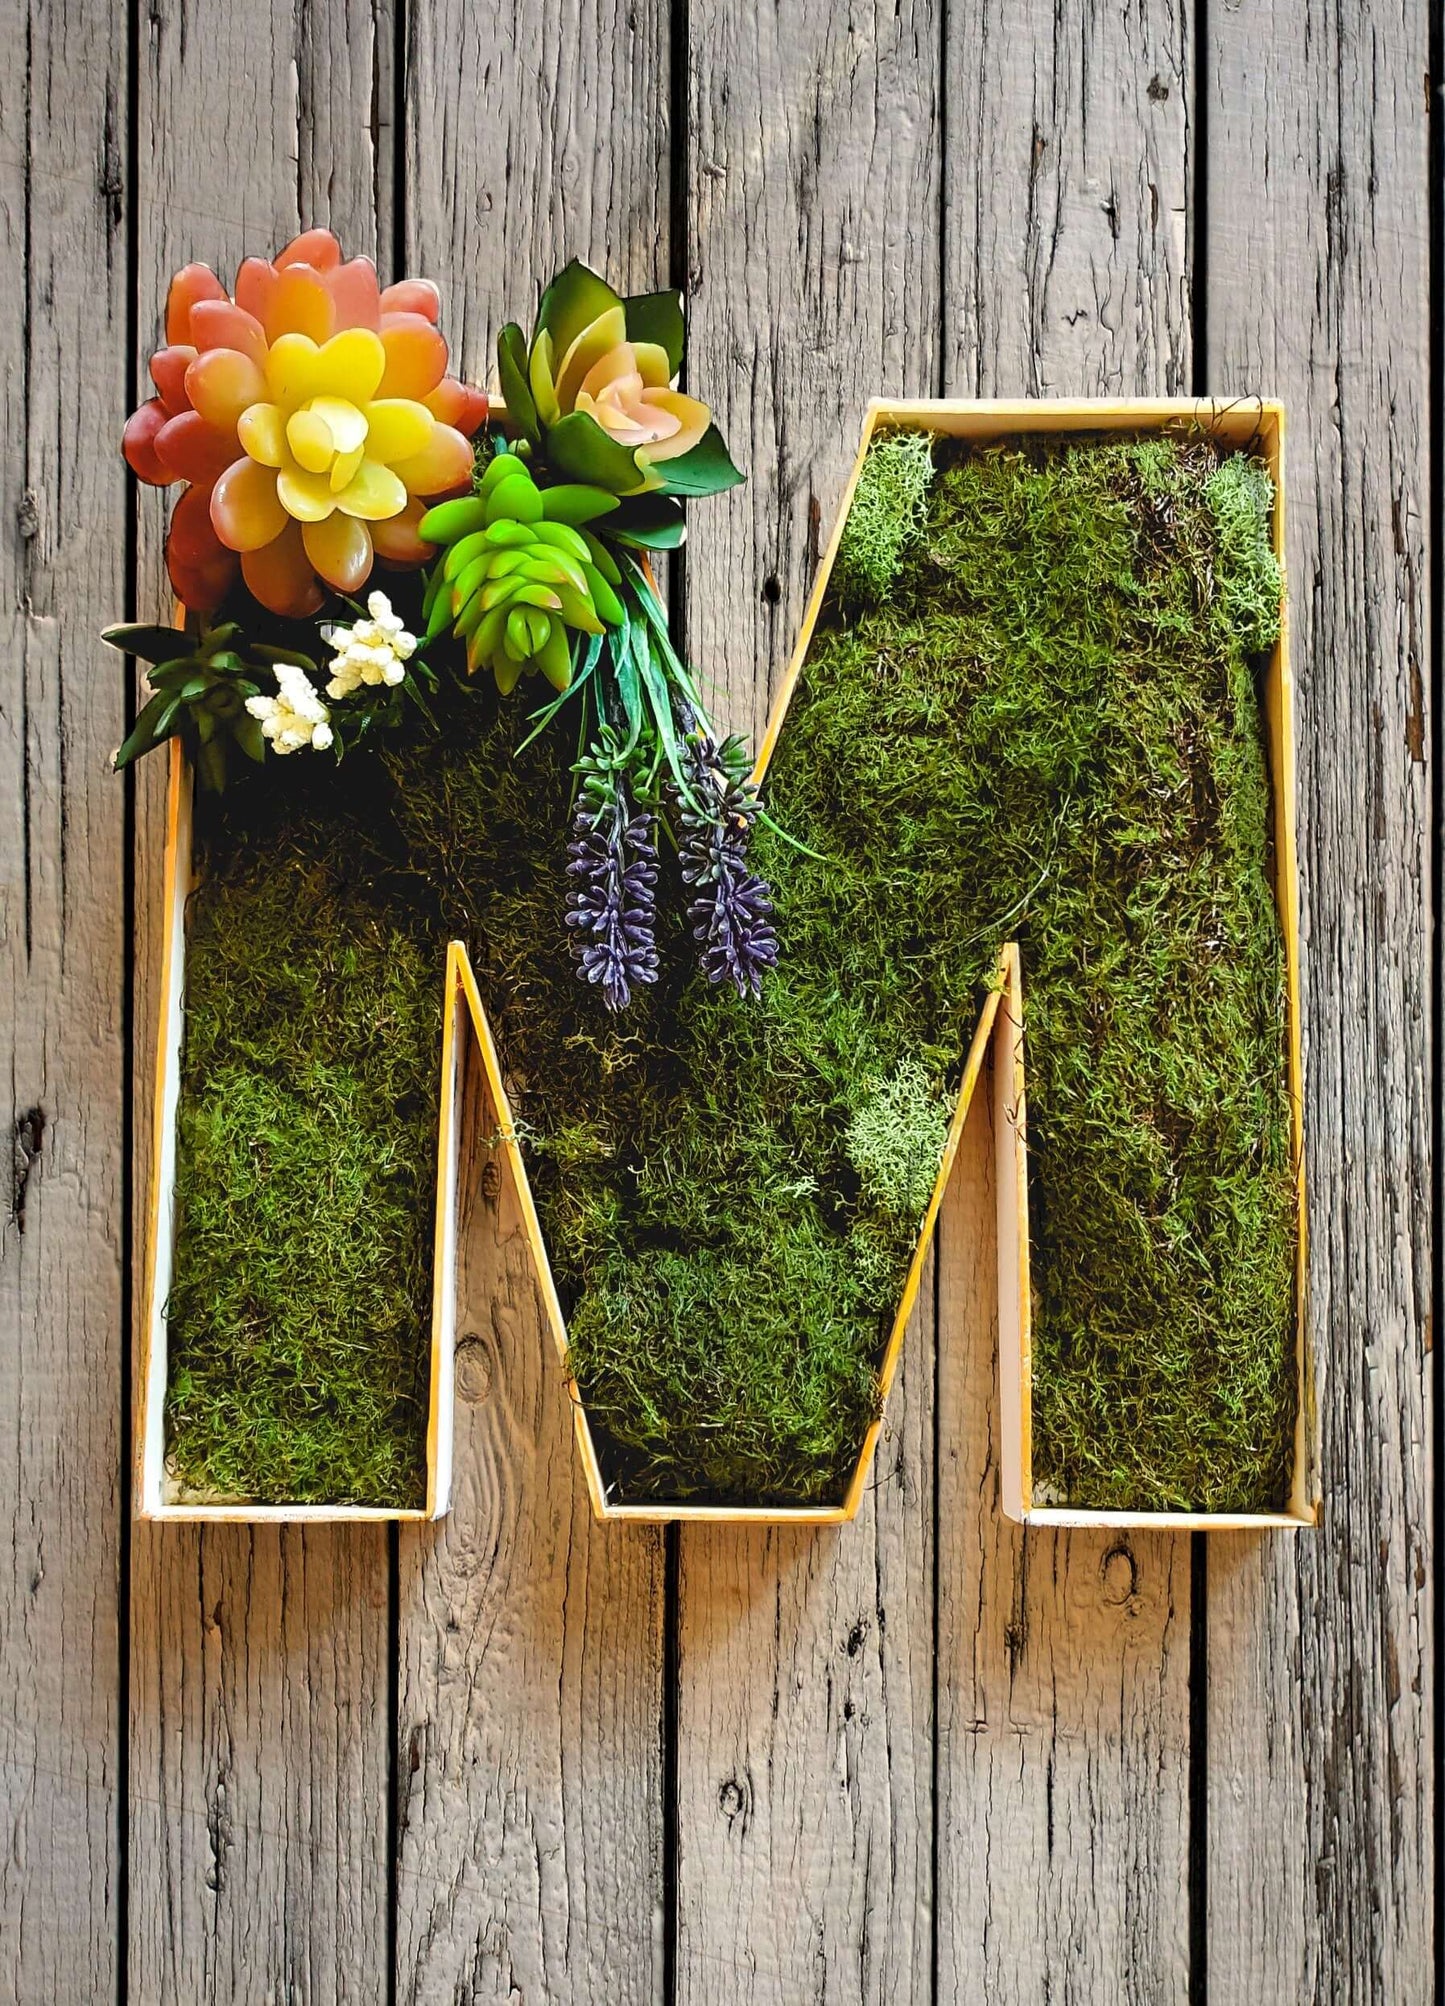 Moss letters, Succulent letters, Moss Covered Letters, Moss wall art, moss art, moss, letter with moss, outdoor moss letters, large moss letters, moss covered letters for wedding - mossartbyrishstudio